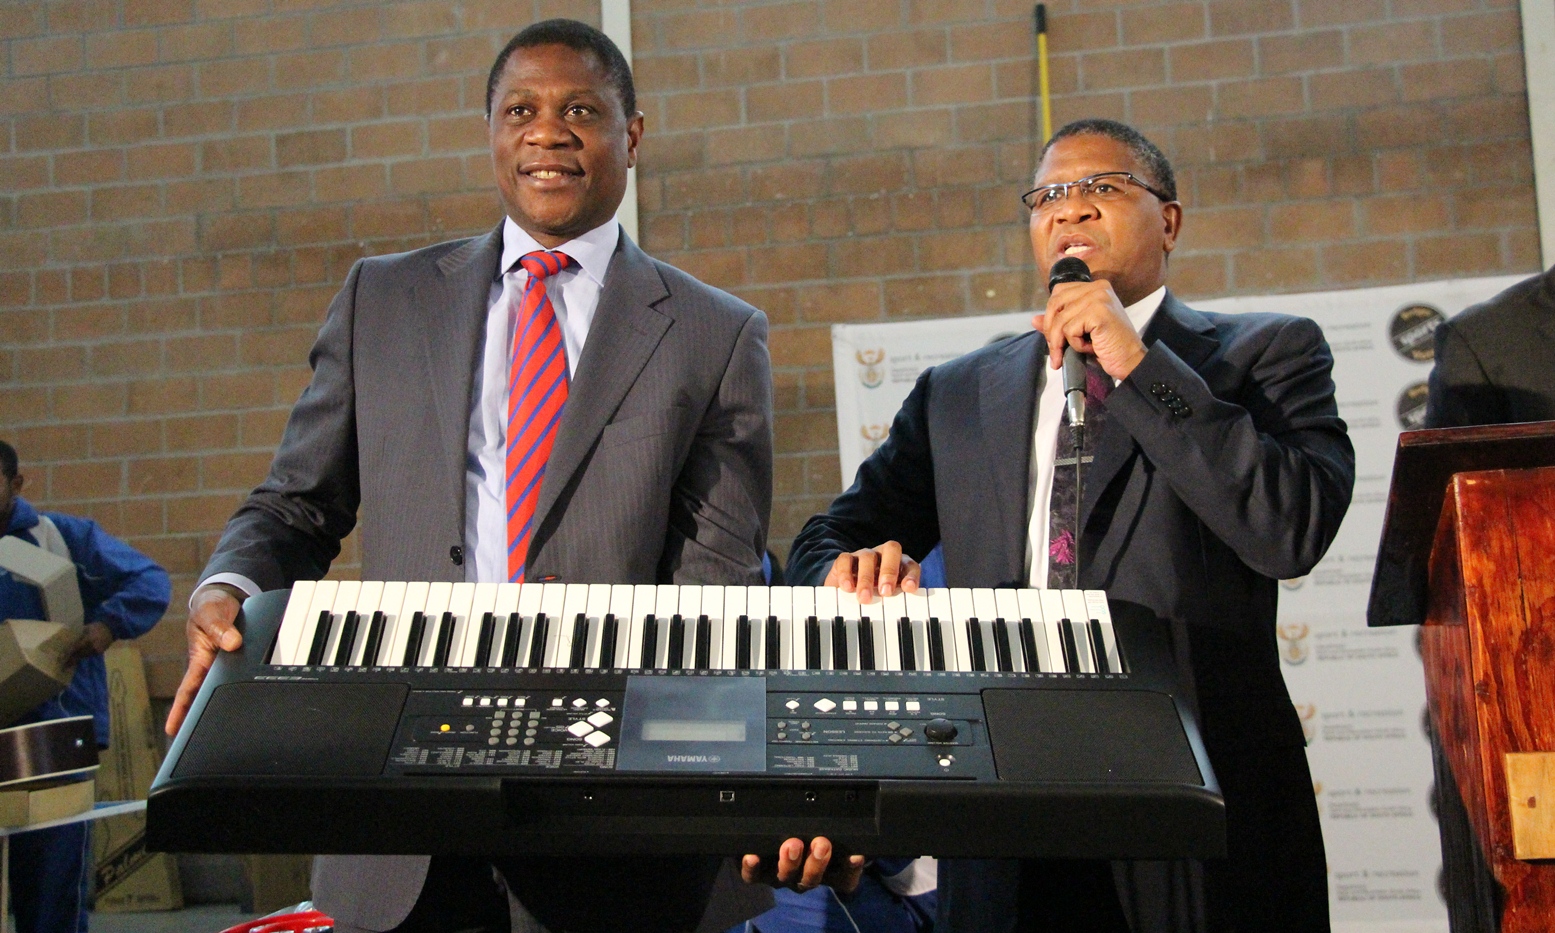 Ministers Paul Mashatile and Fikile Mbalula handed over equipment toWalter Teka Primary School and Oscar Mpetha High School.